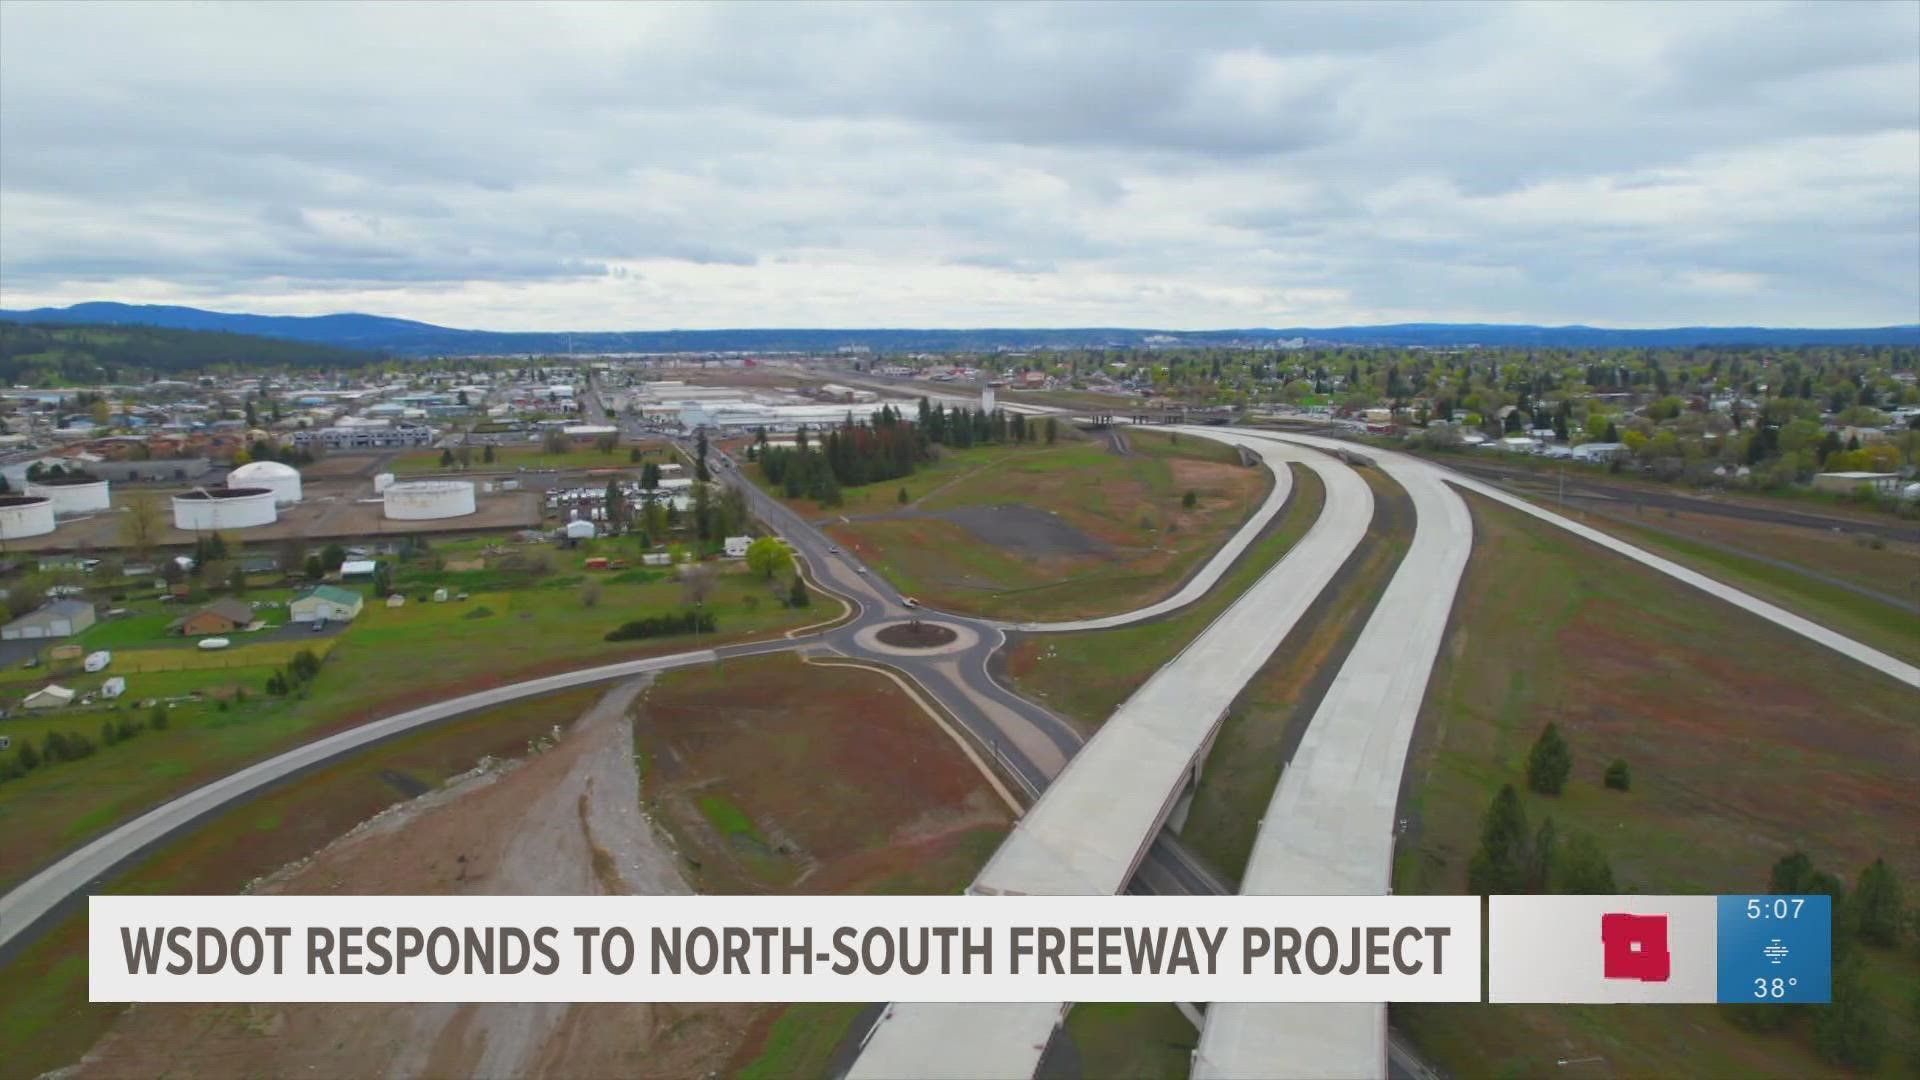 In a statement, WSDOT says numerous factors, such as project fund sources and statewide competition for contractors, can impact the North-South freeway timeline.